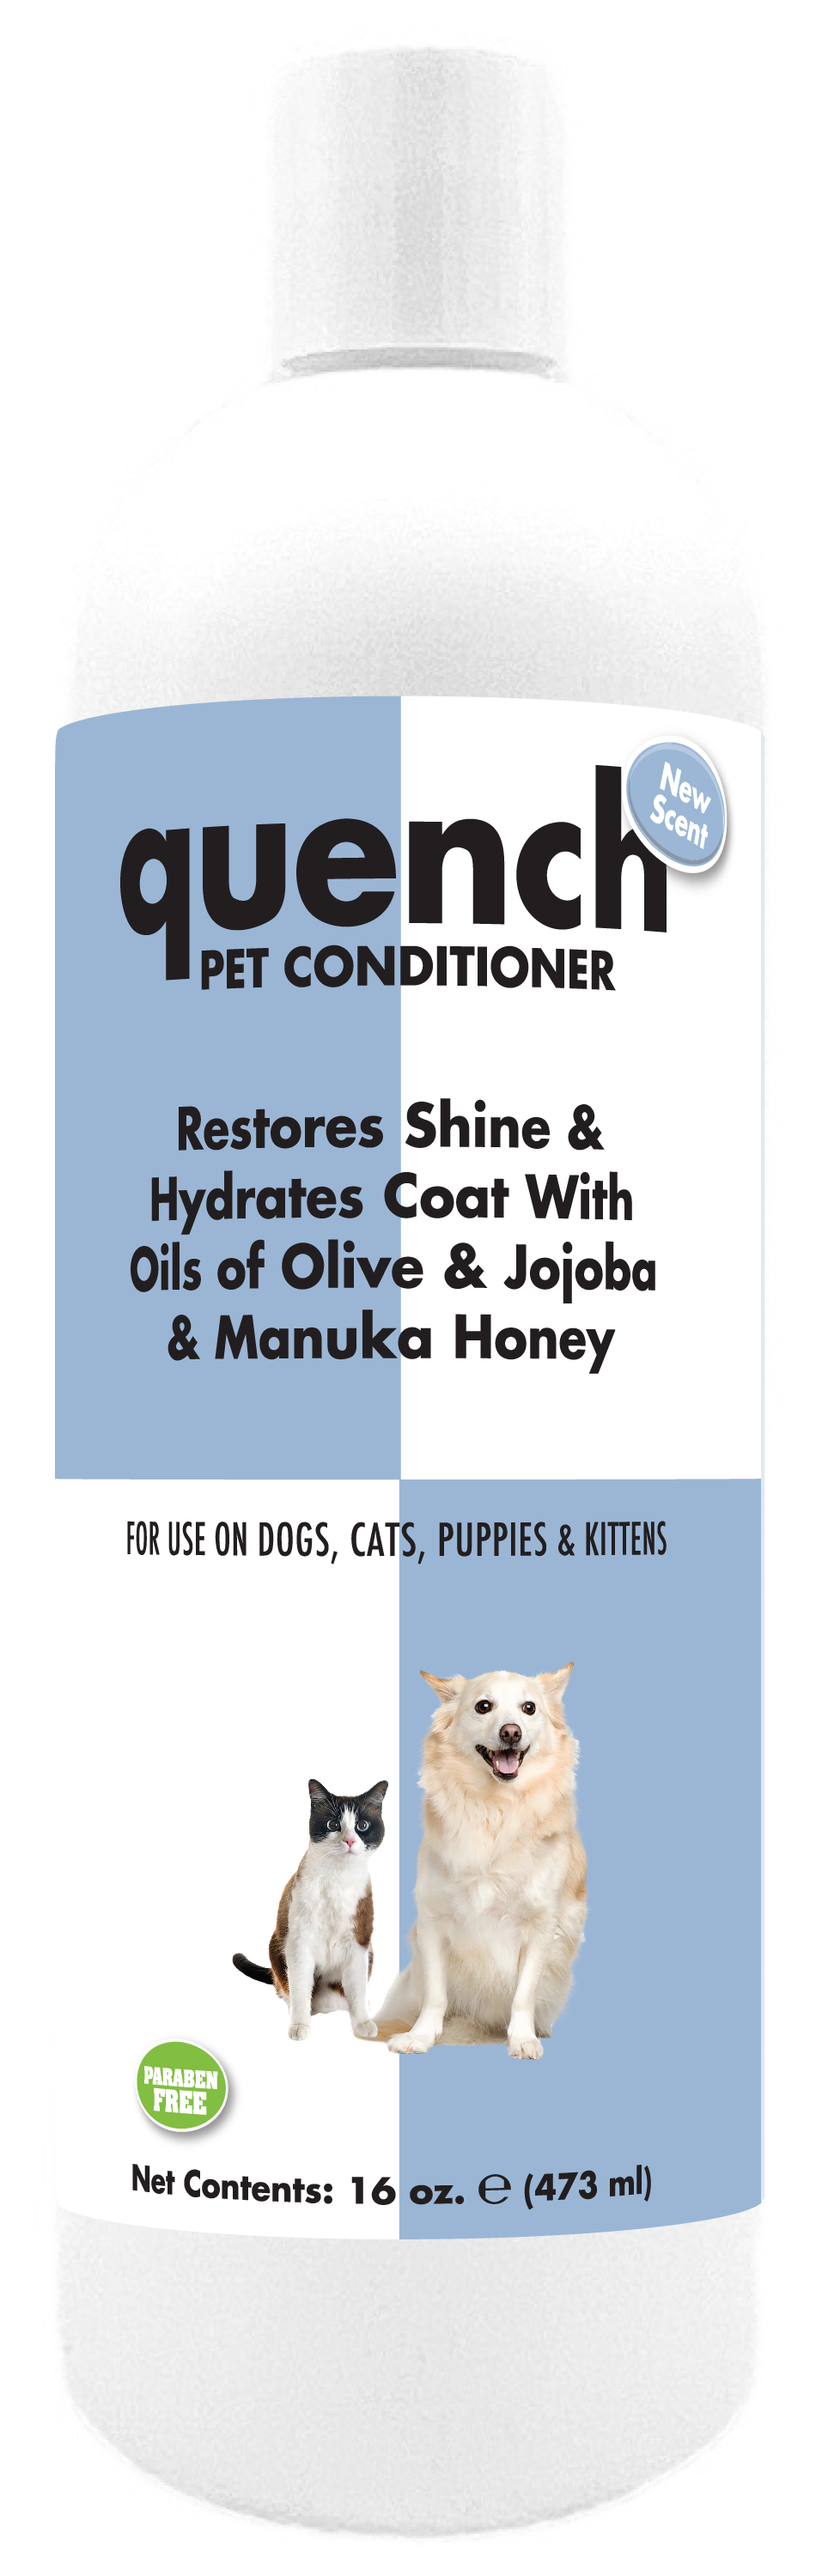 Quench Pet Conditioner